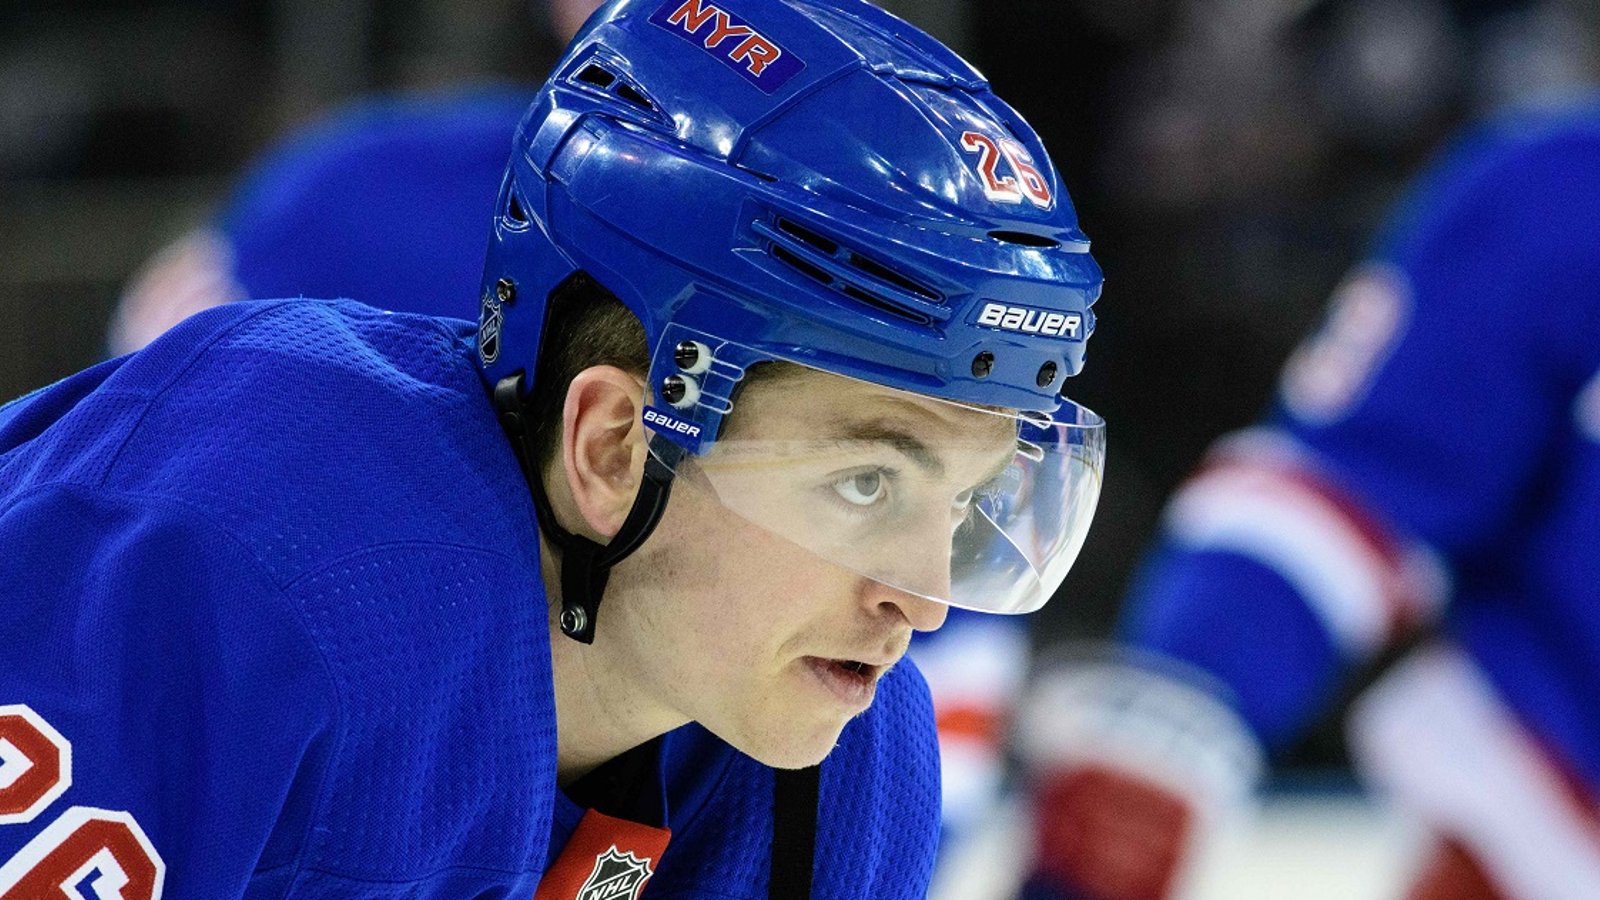 Leafs have signed Jimmy Vesey to a new contract.